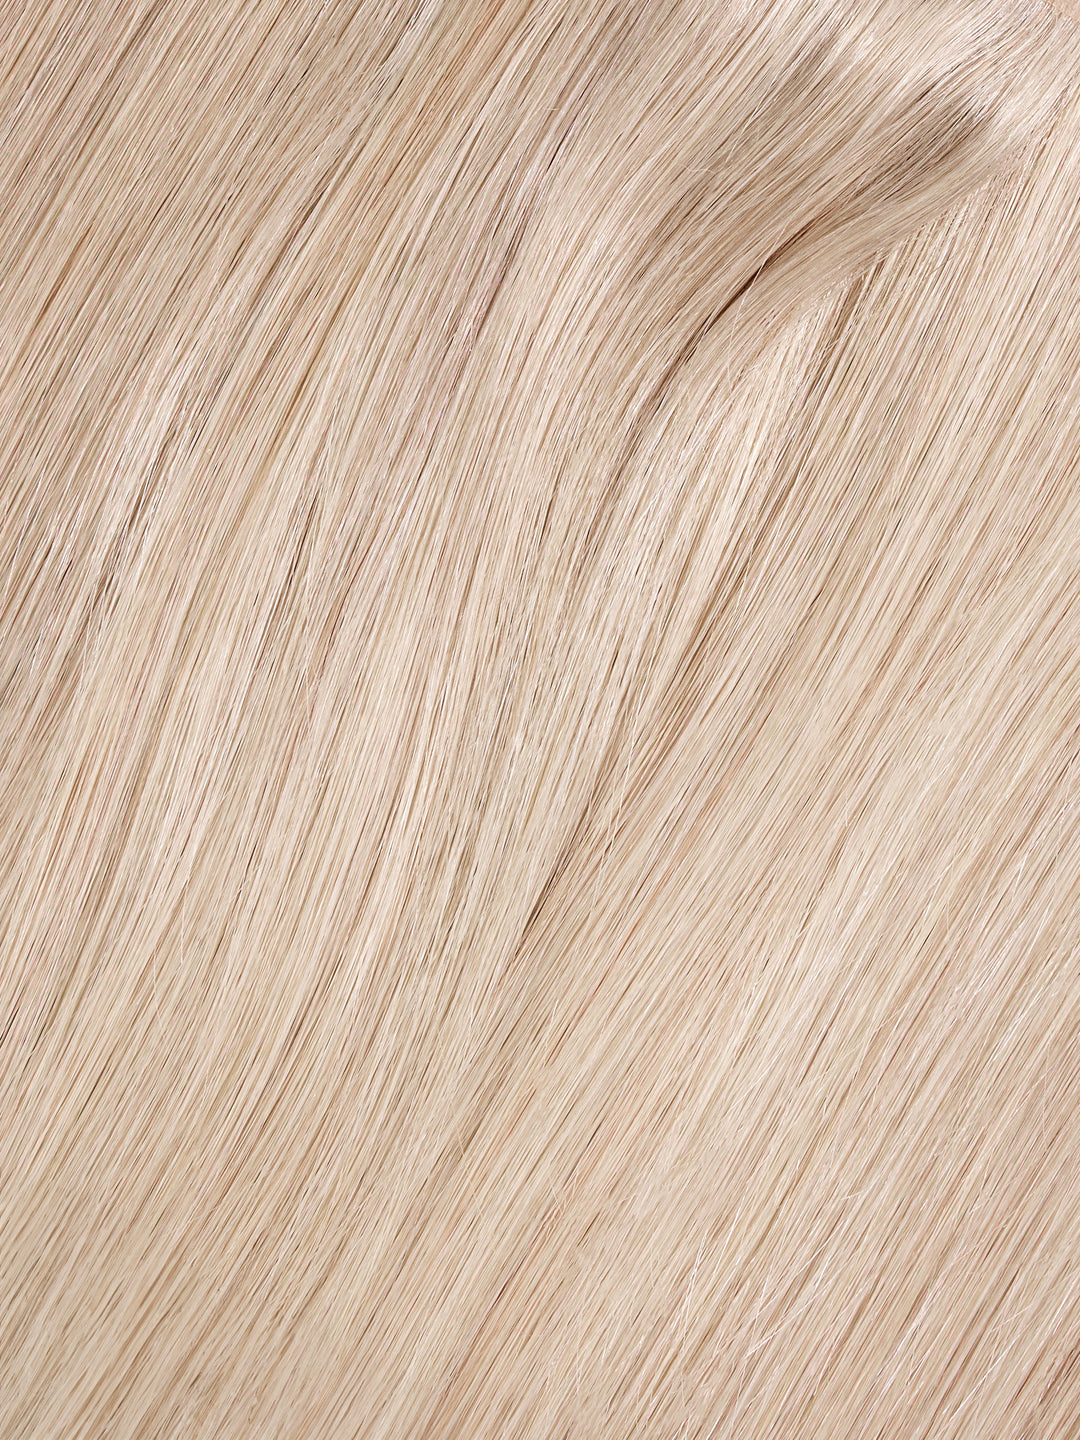 Caramel Blonde Remy Hair Ponytail (20" and 130g)